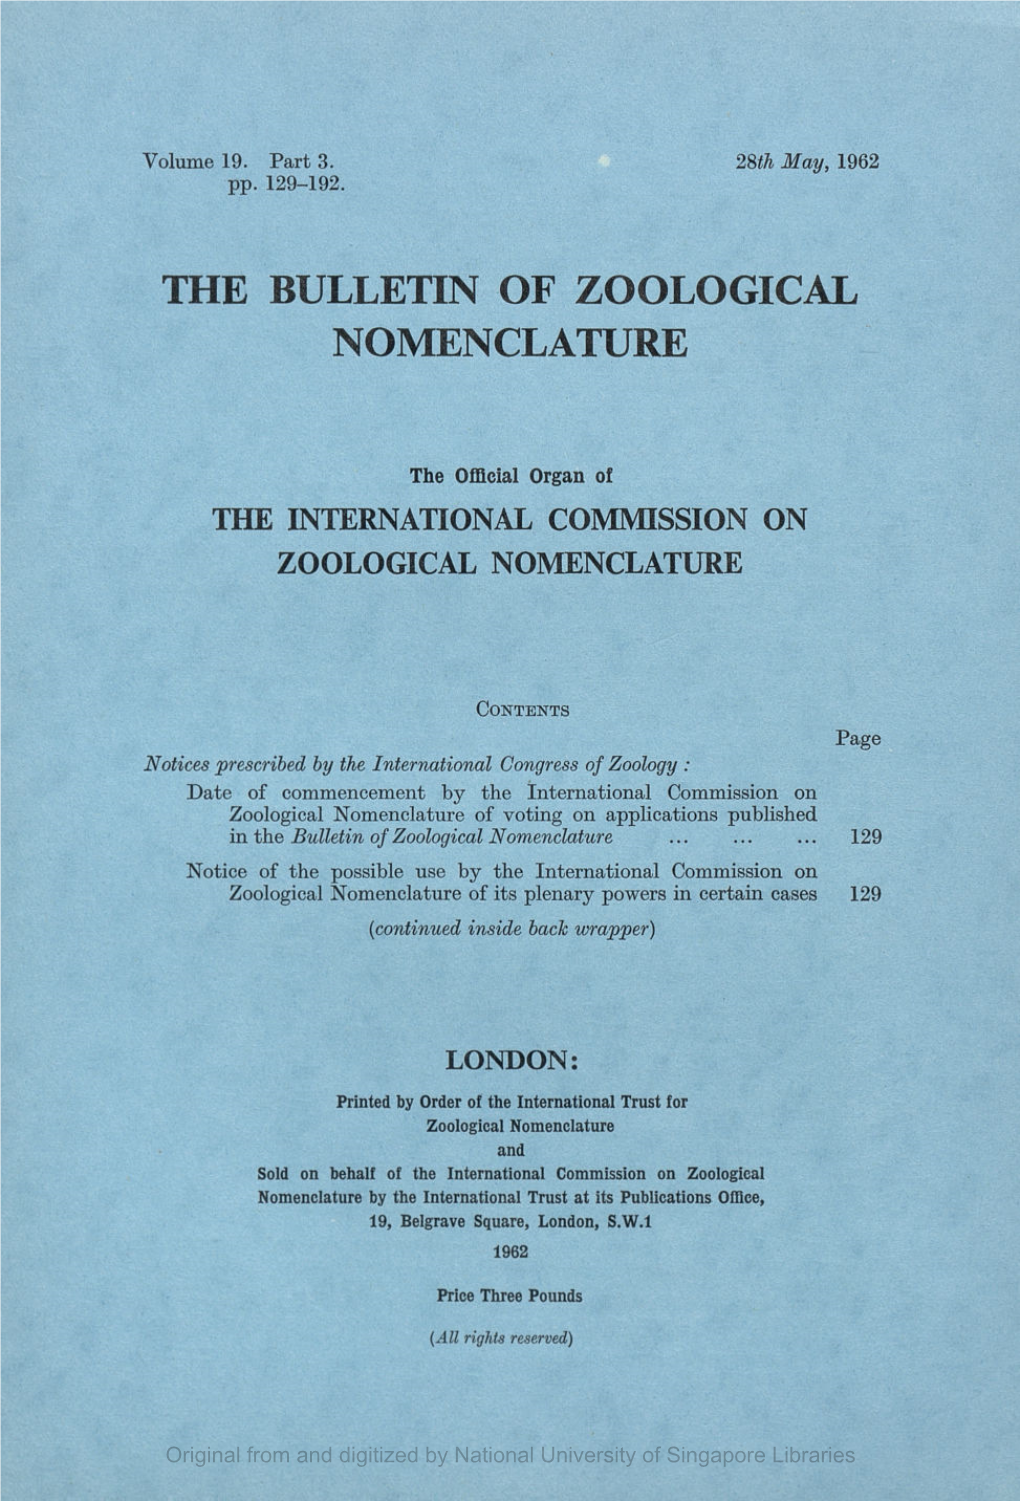 The Bulletin of Zoological Nomenclature, Vol19, Part 3